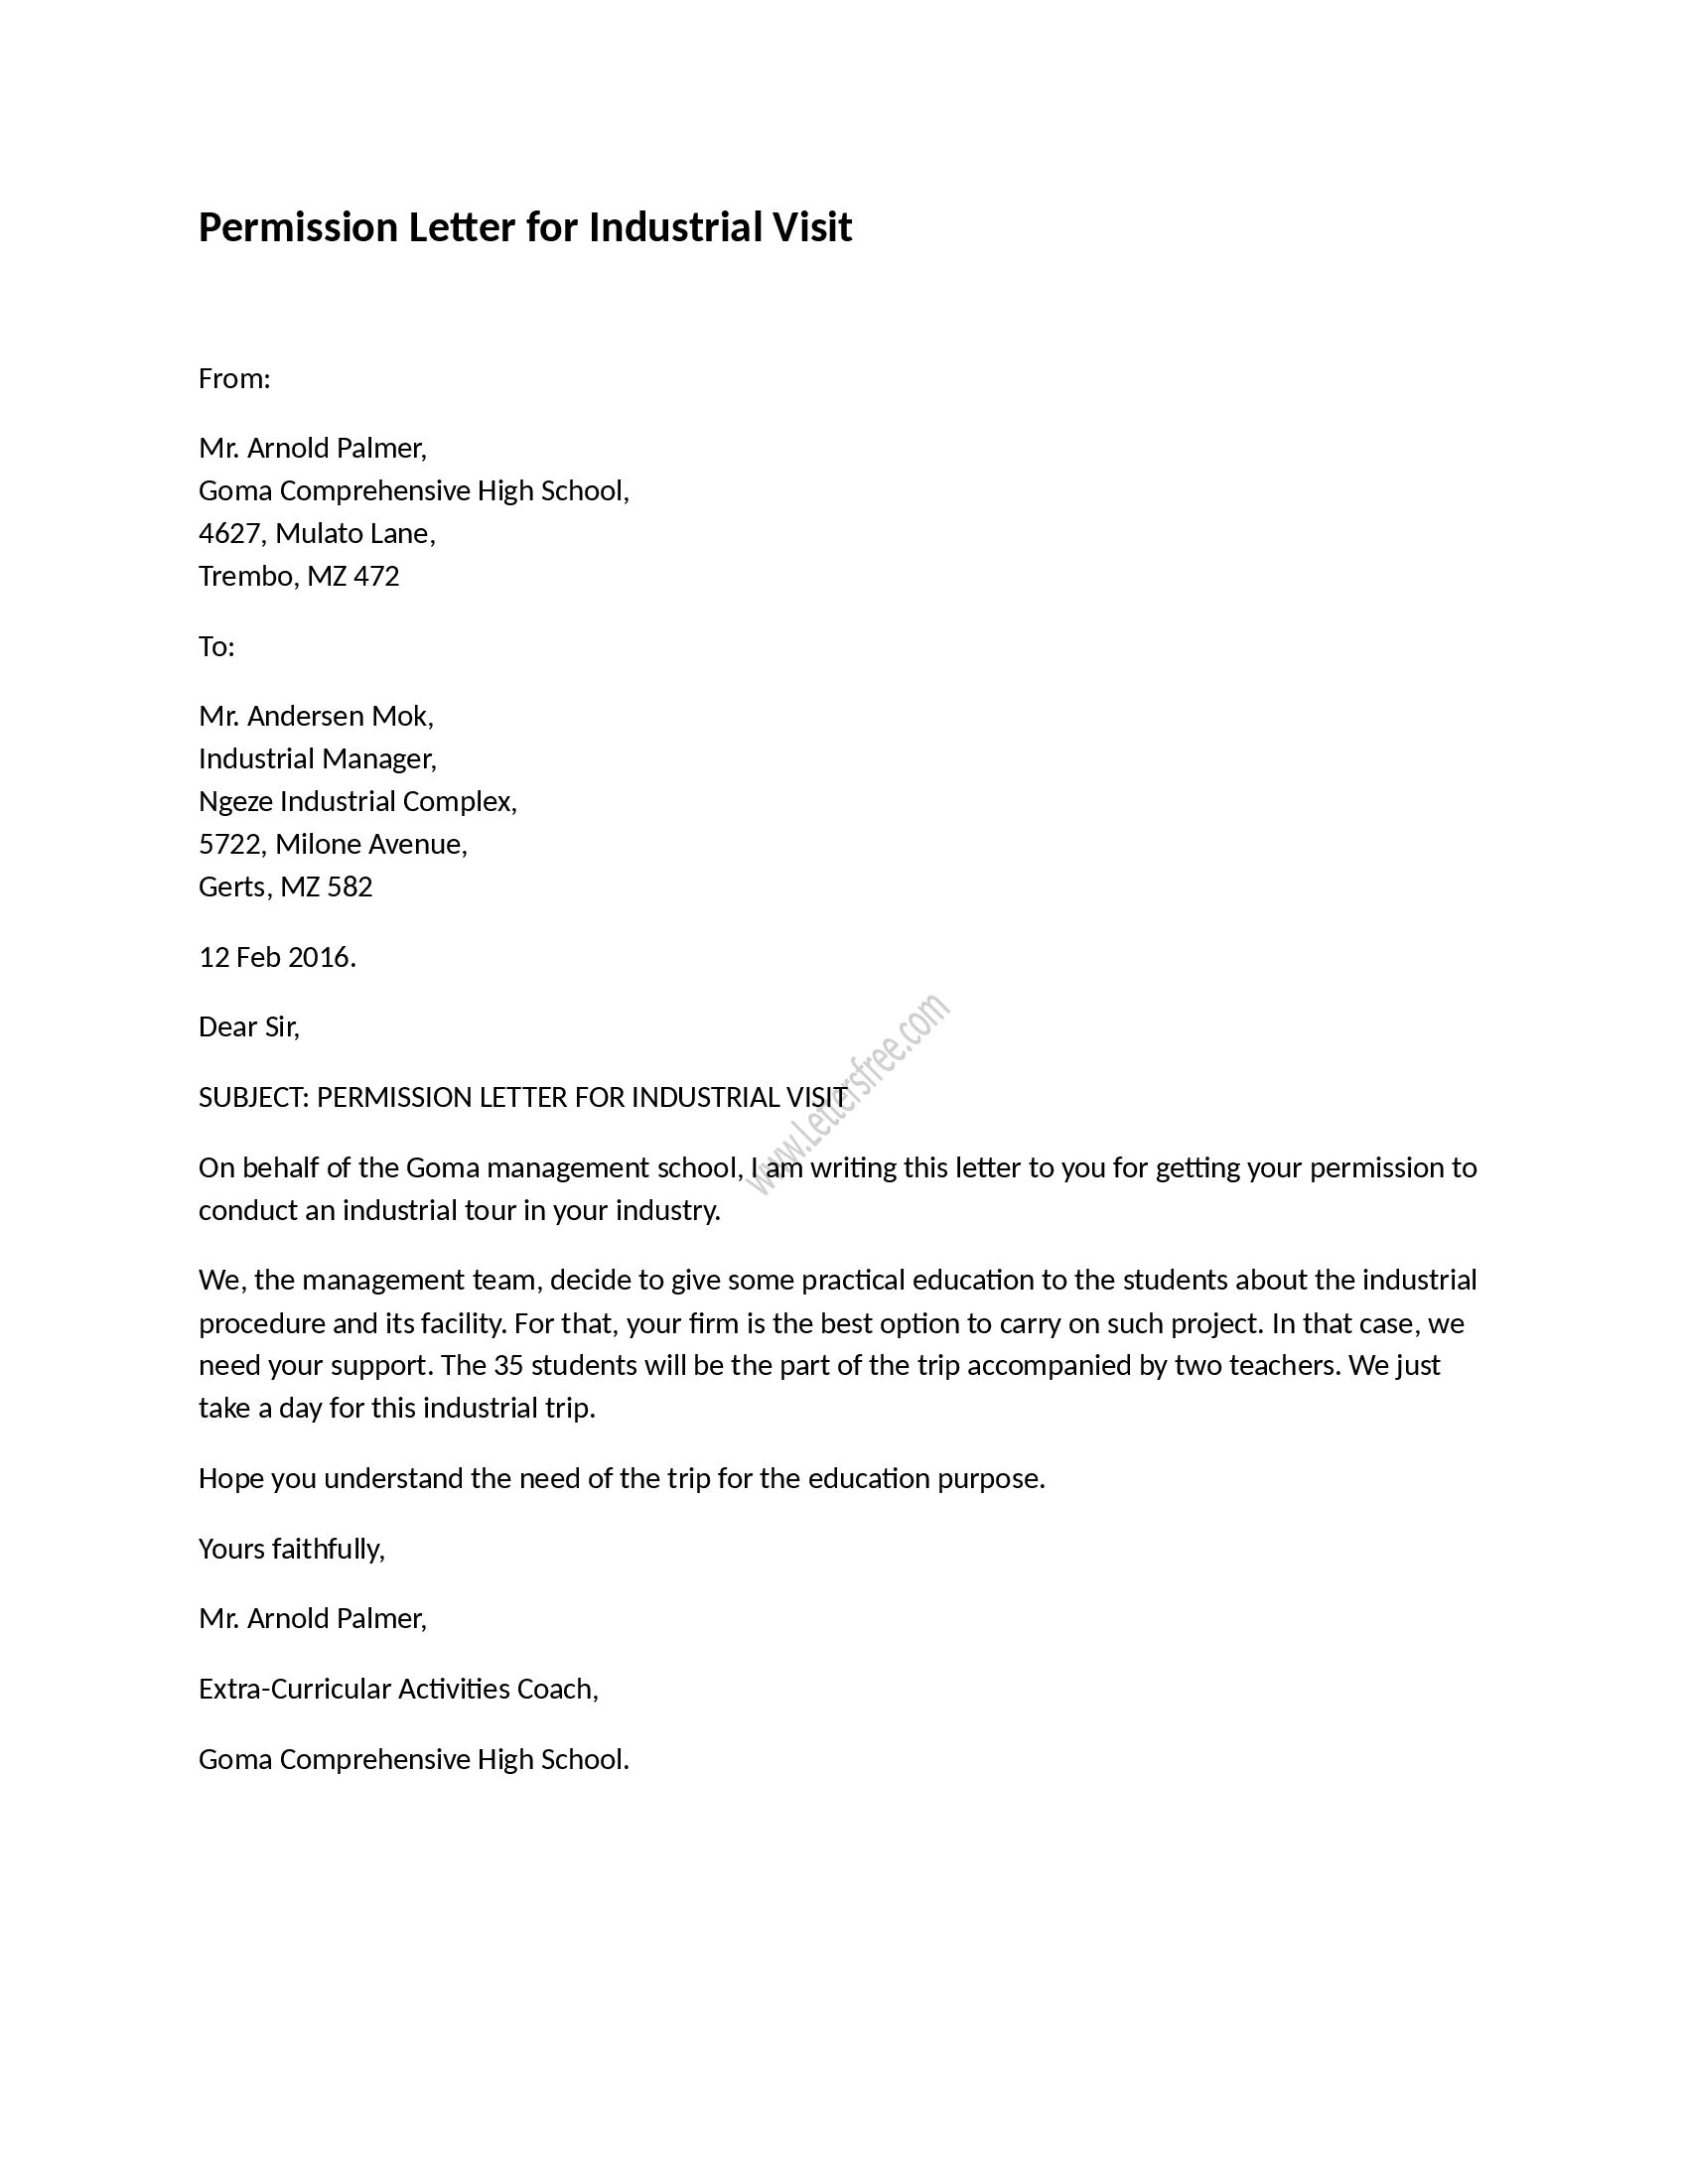 Permission to Travel Letter Template - Permission Letter for Industrial Visit Pinterest